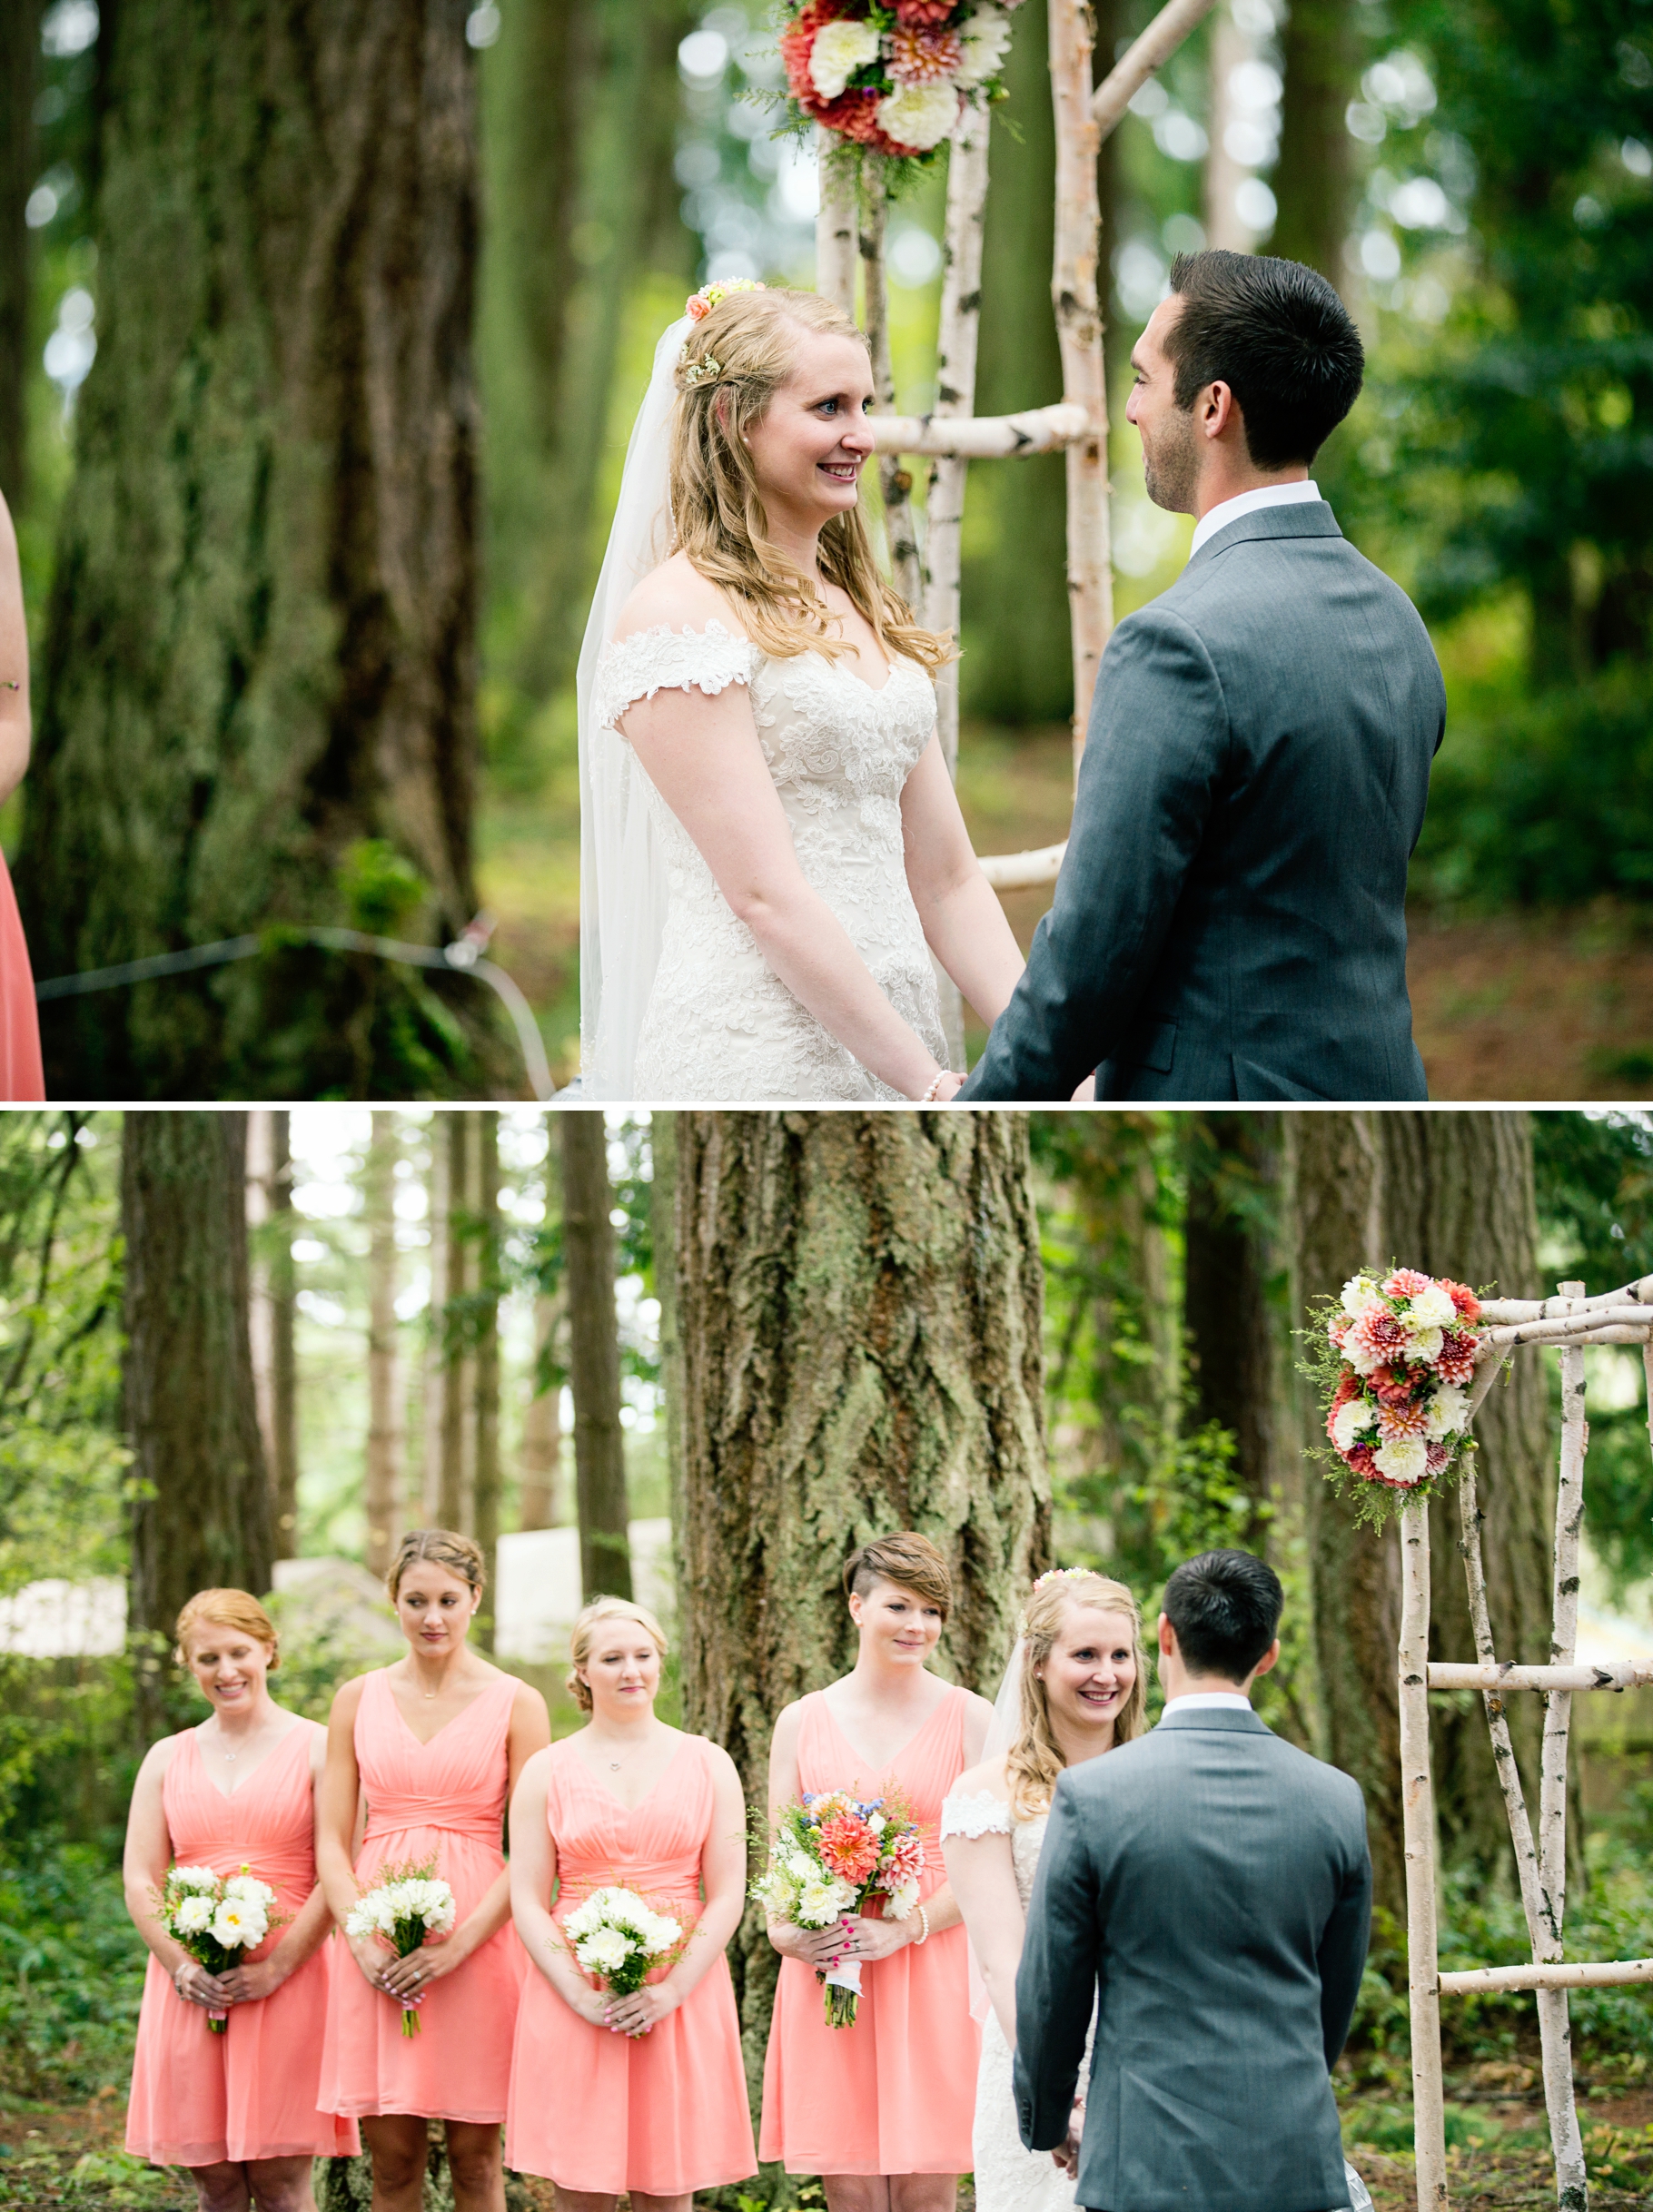 36-Ceremony-Bride-Groom-Vows-wooded-bluff-olympic-mountains-Kitsap-Memorial-State-Park-Forest-Northwest-Photographer-Seattle-Wedding-Photography-by-Betty-Elaine